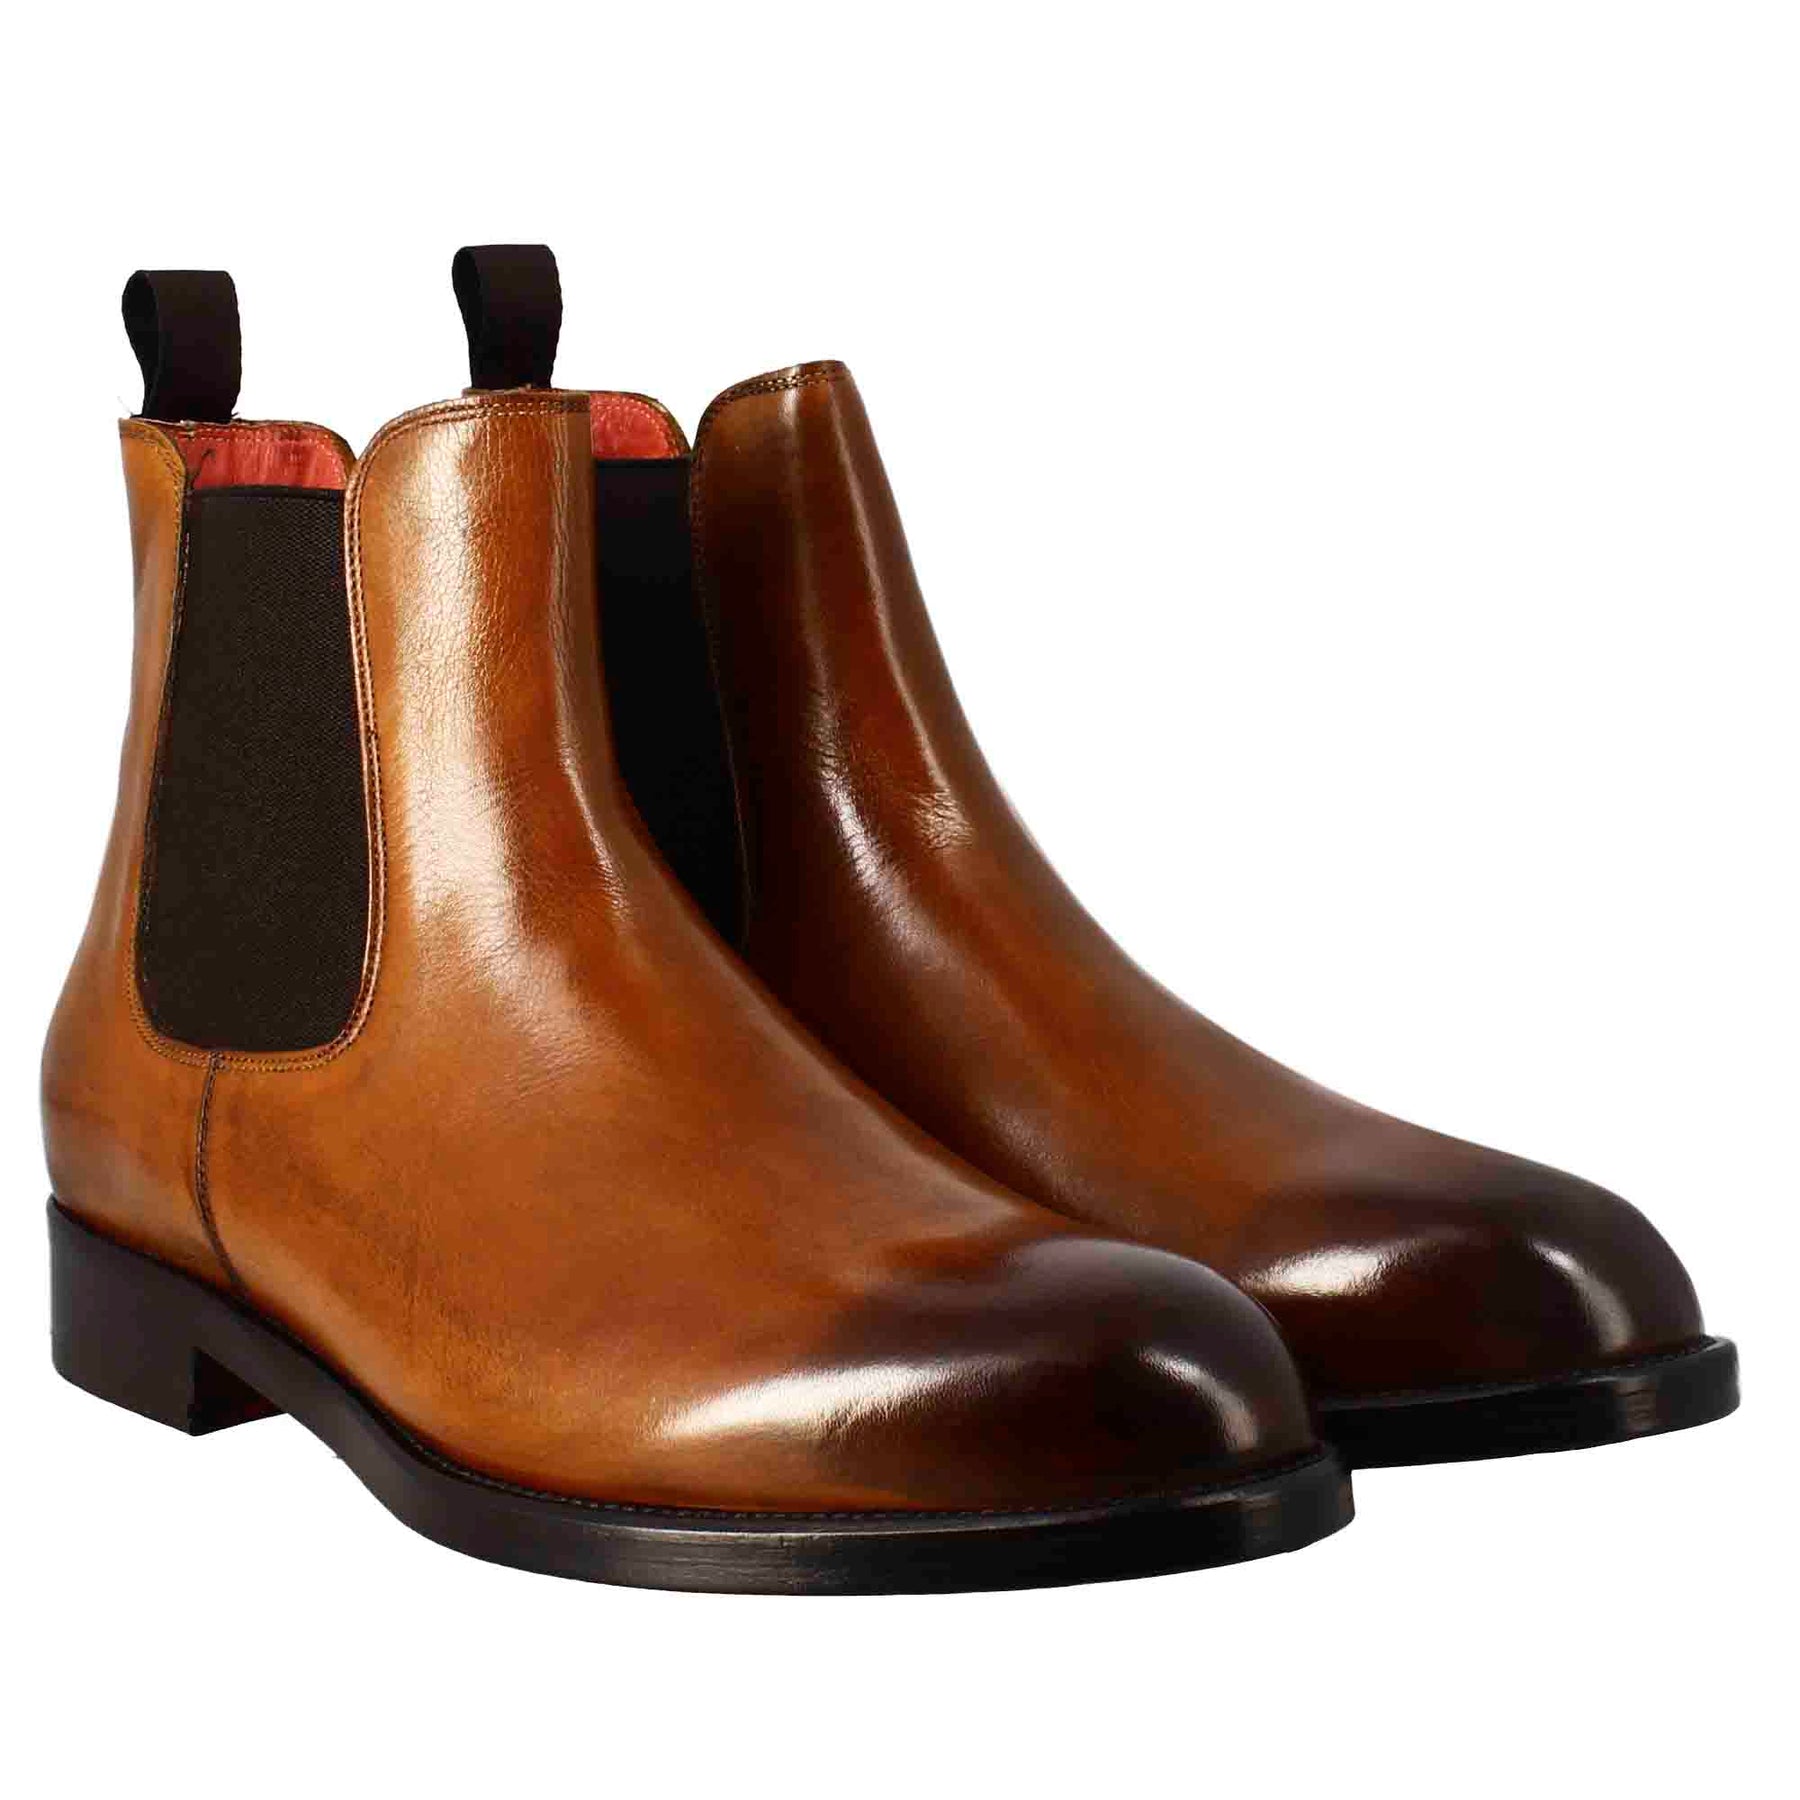 Smooth men's chelsea boot in light brown leather with elastic